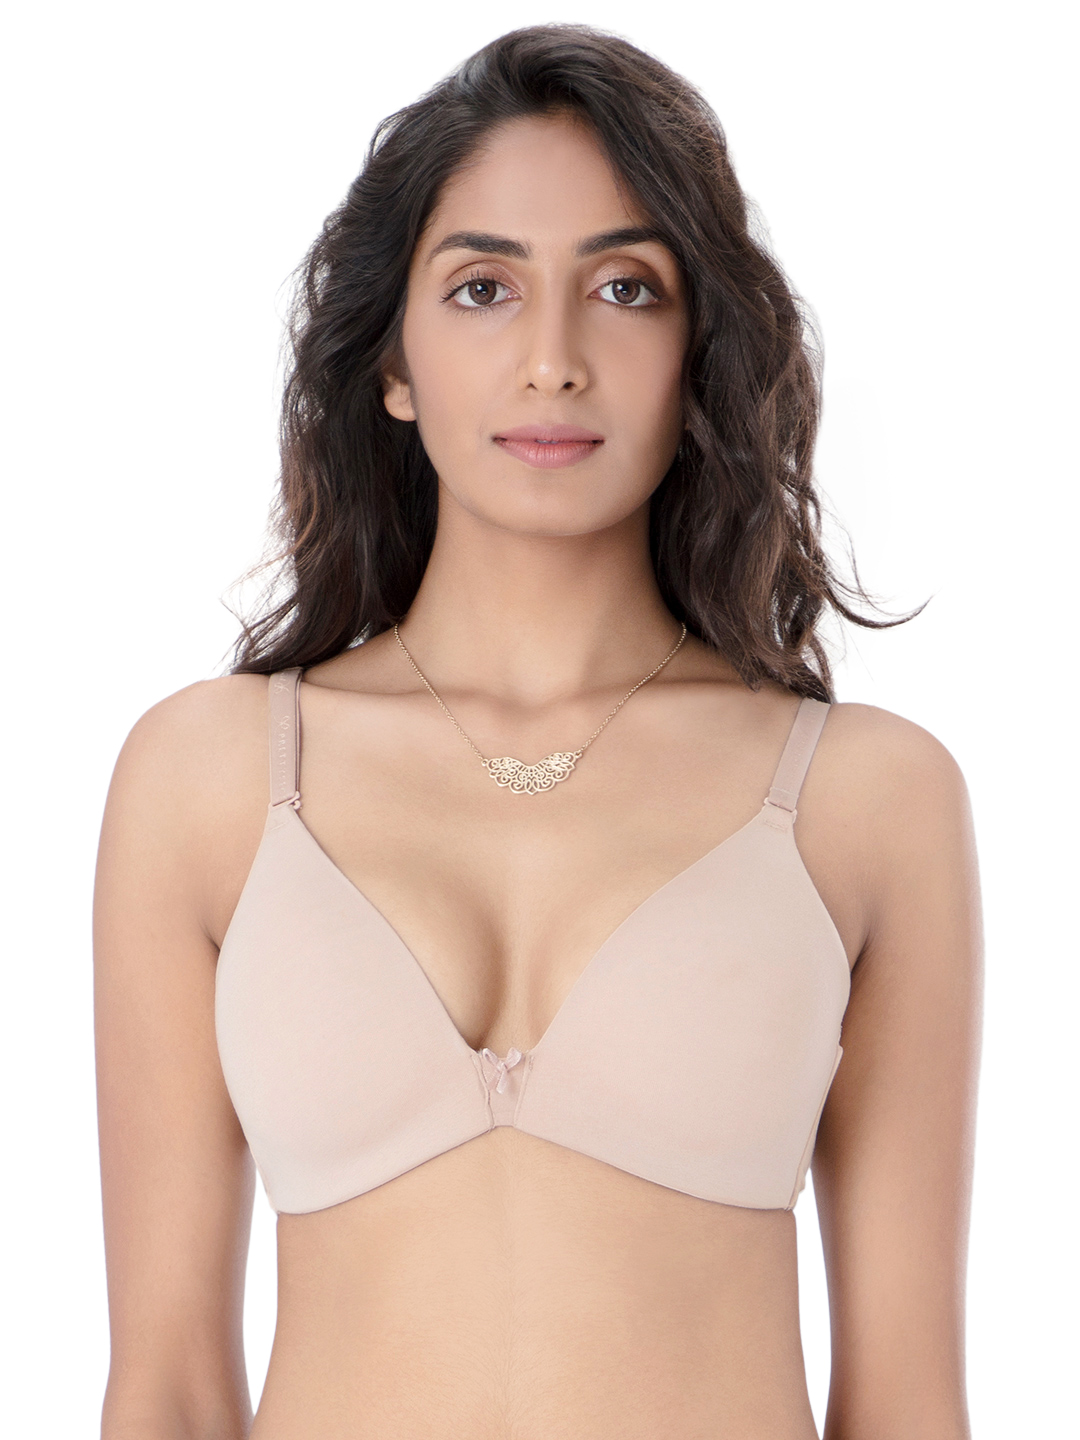 PrettySecrets Nude-Coloured Non-Wired Lightly Padded T-shirt Bra B0002 Price in India